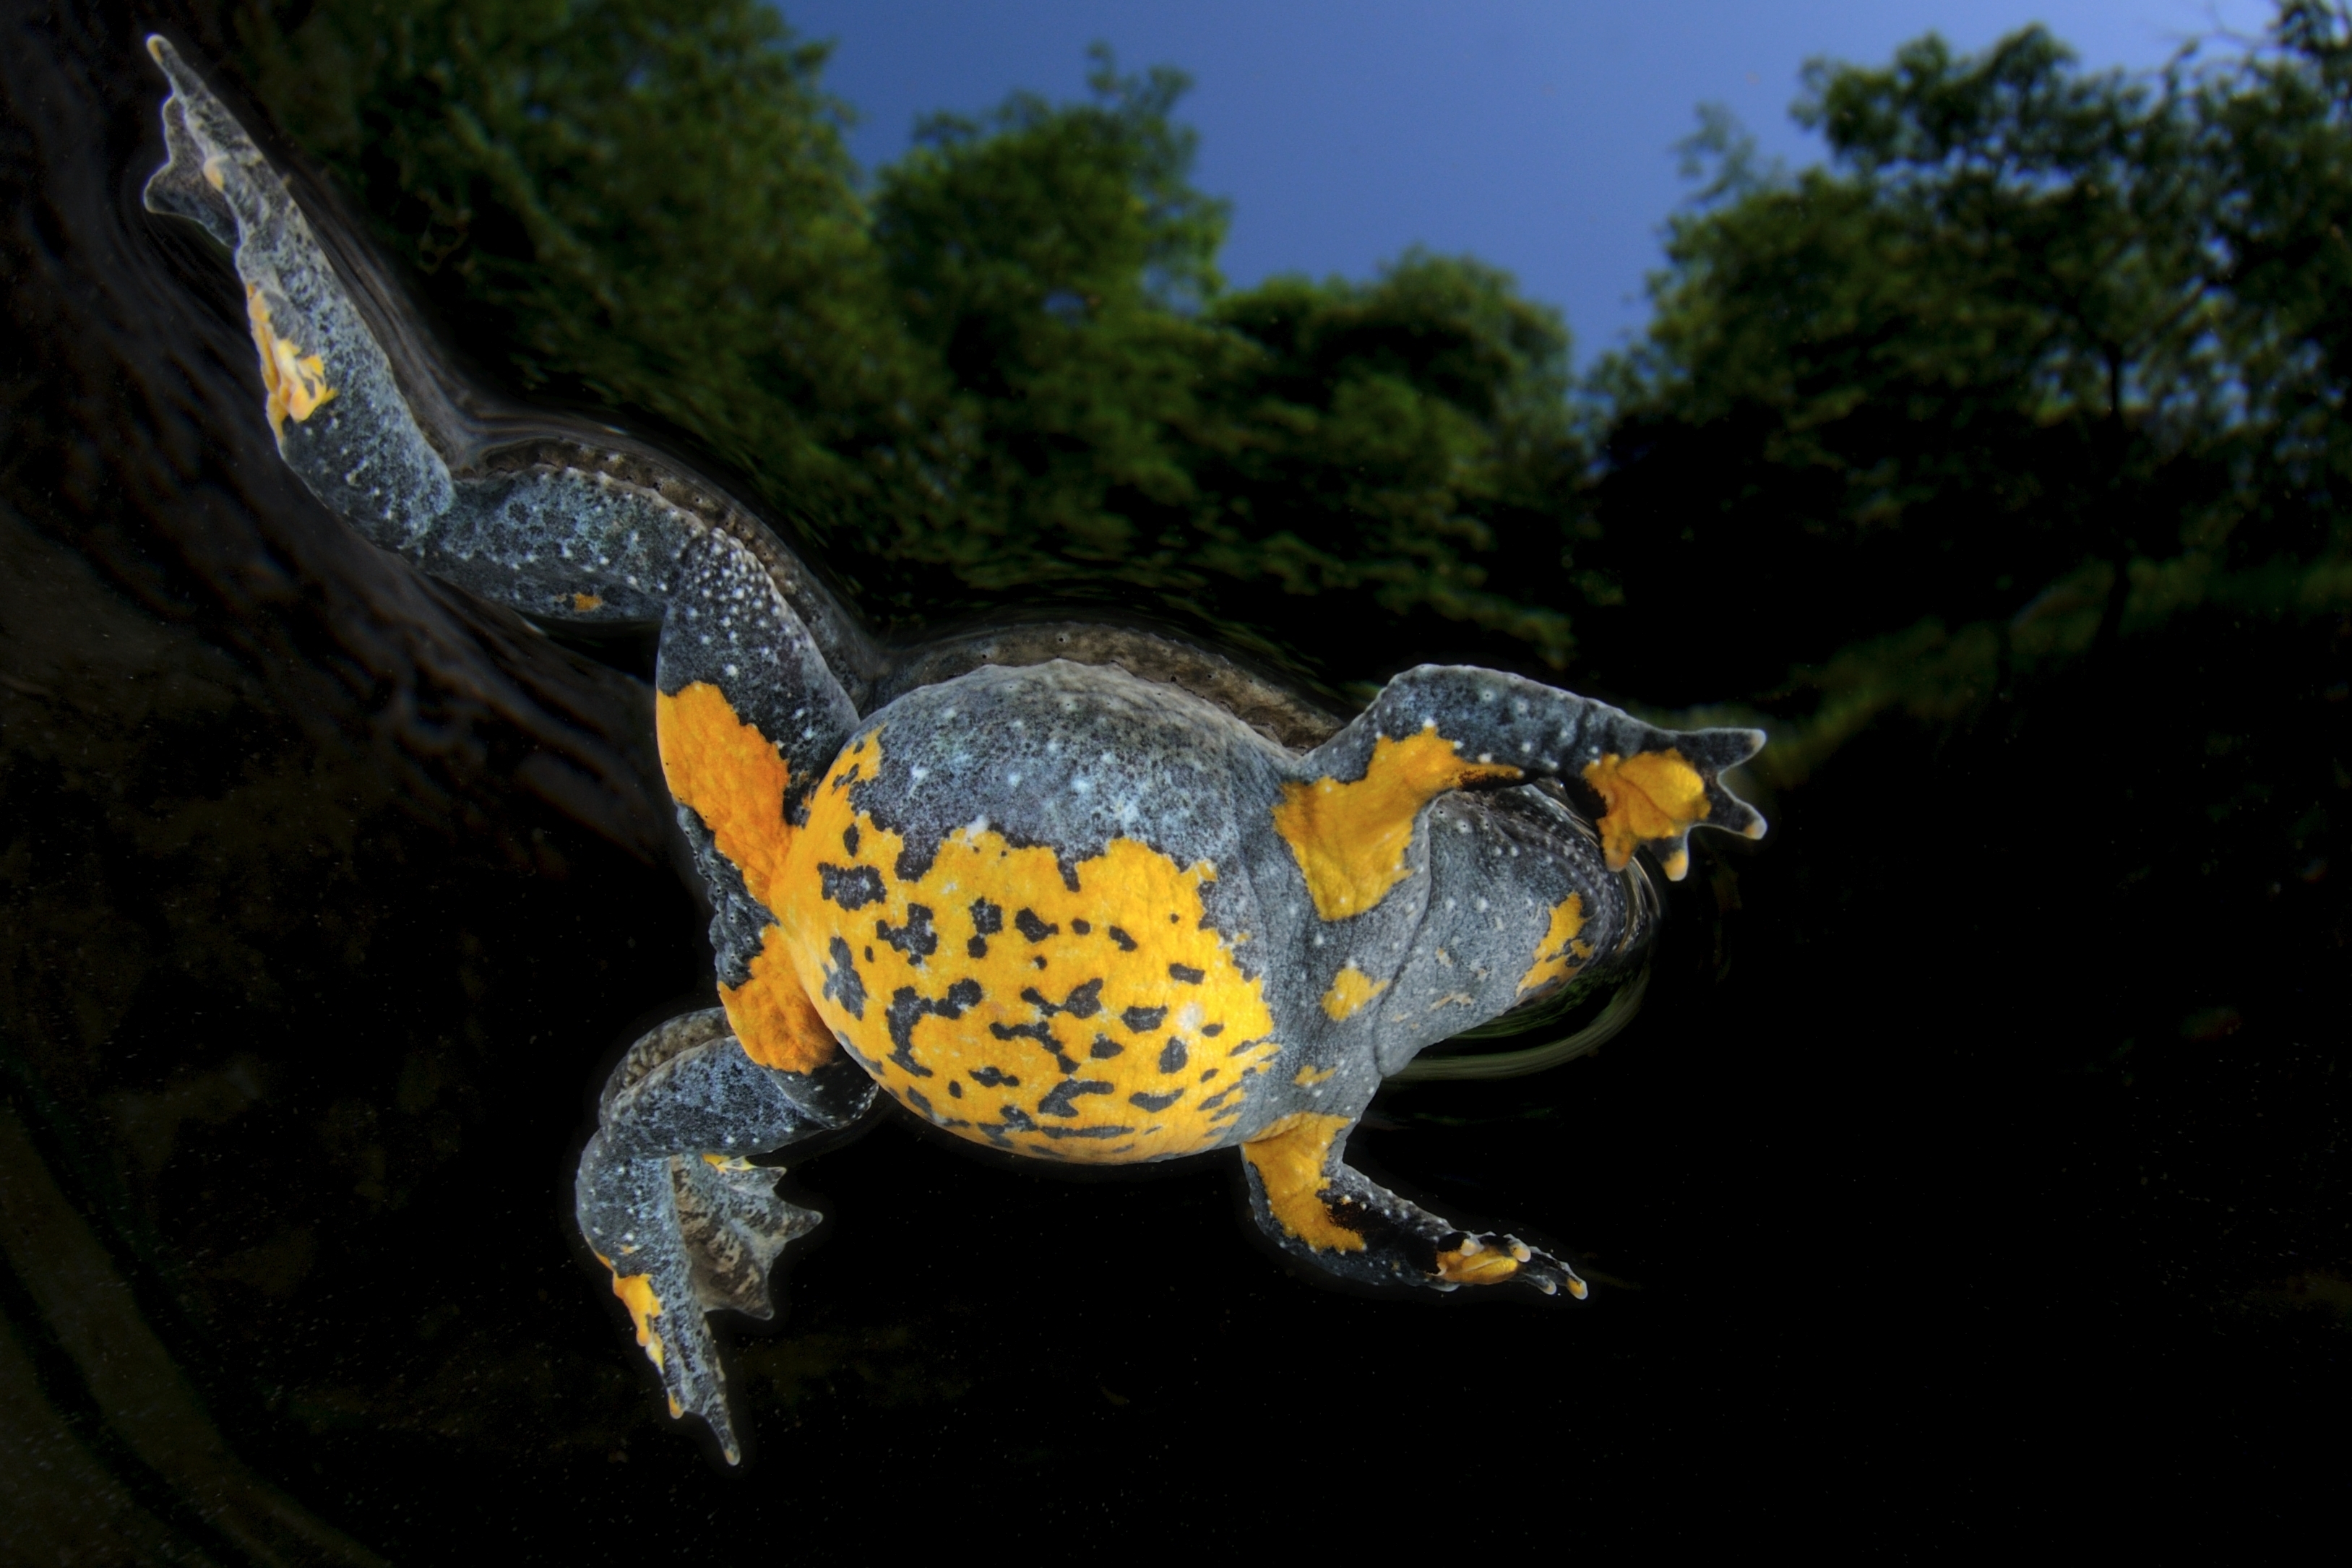 Toads spend most of their lives in or near water. Here an Appenine yellow-bellied toad (Bombina variegata pachypus). | Matteo photos/Shutterstock.com